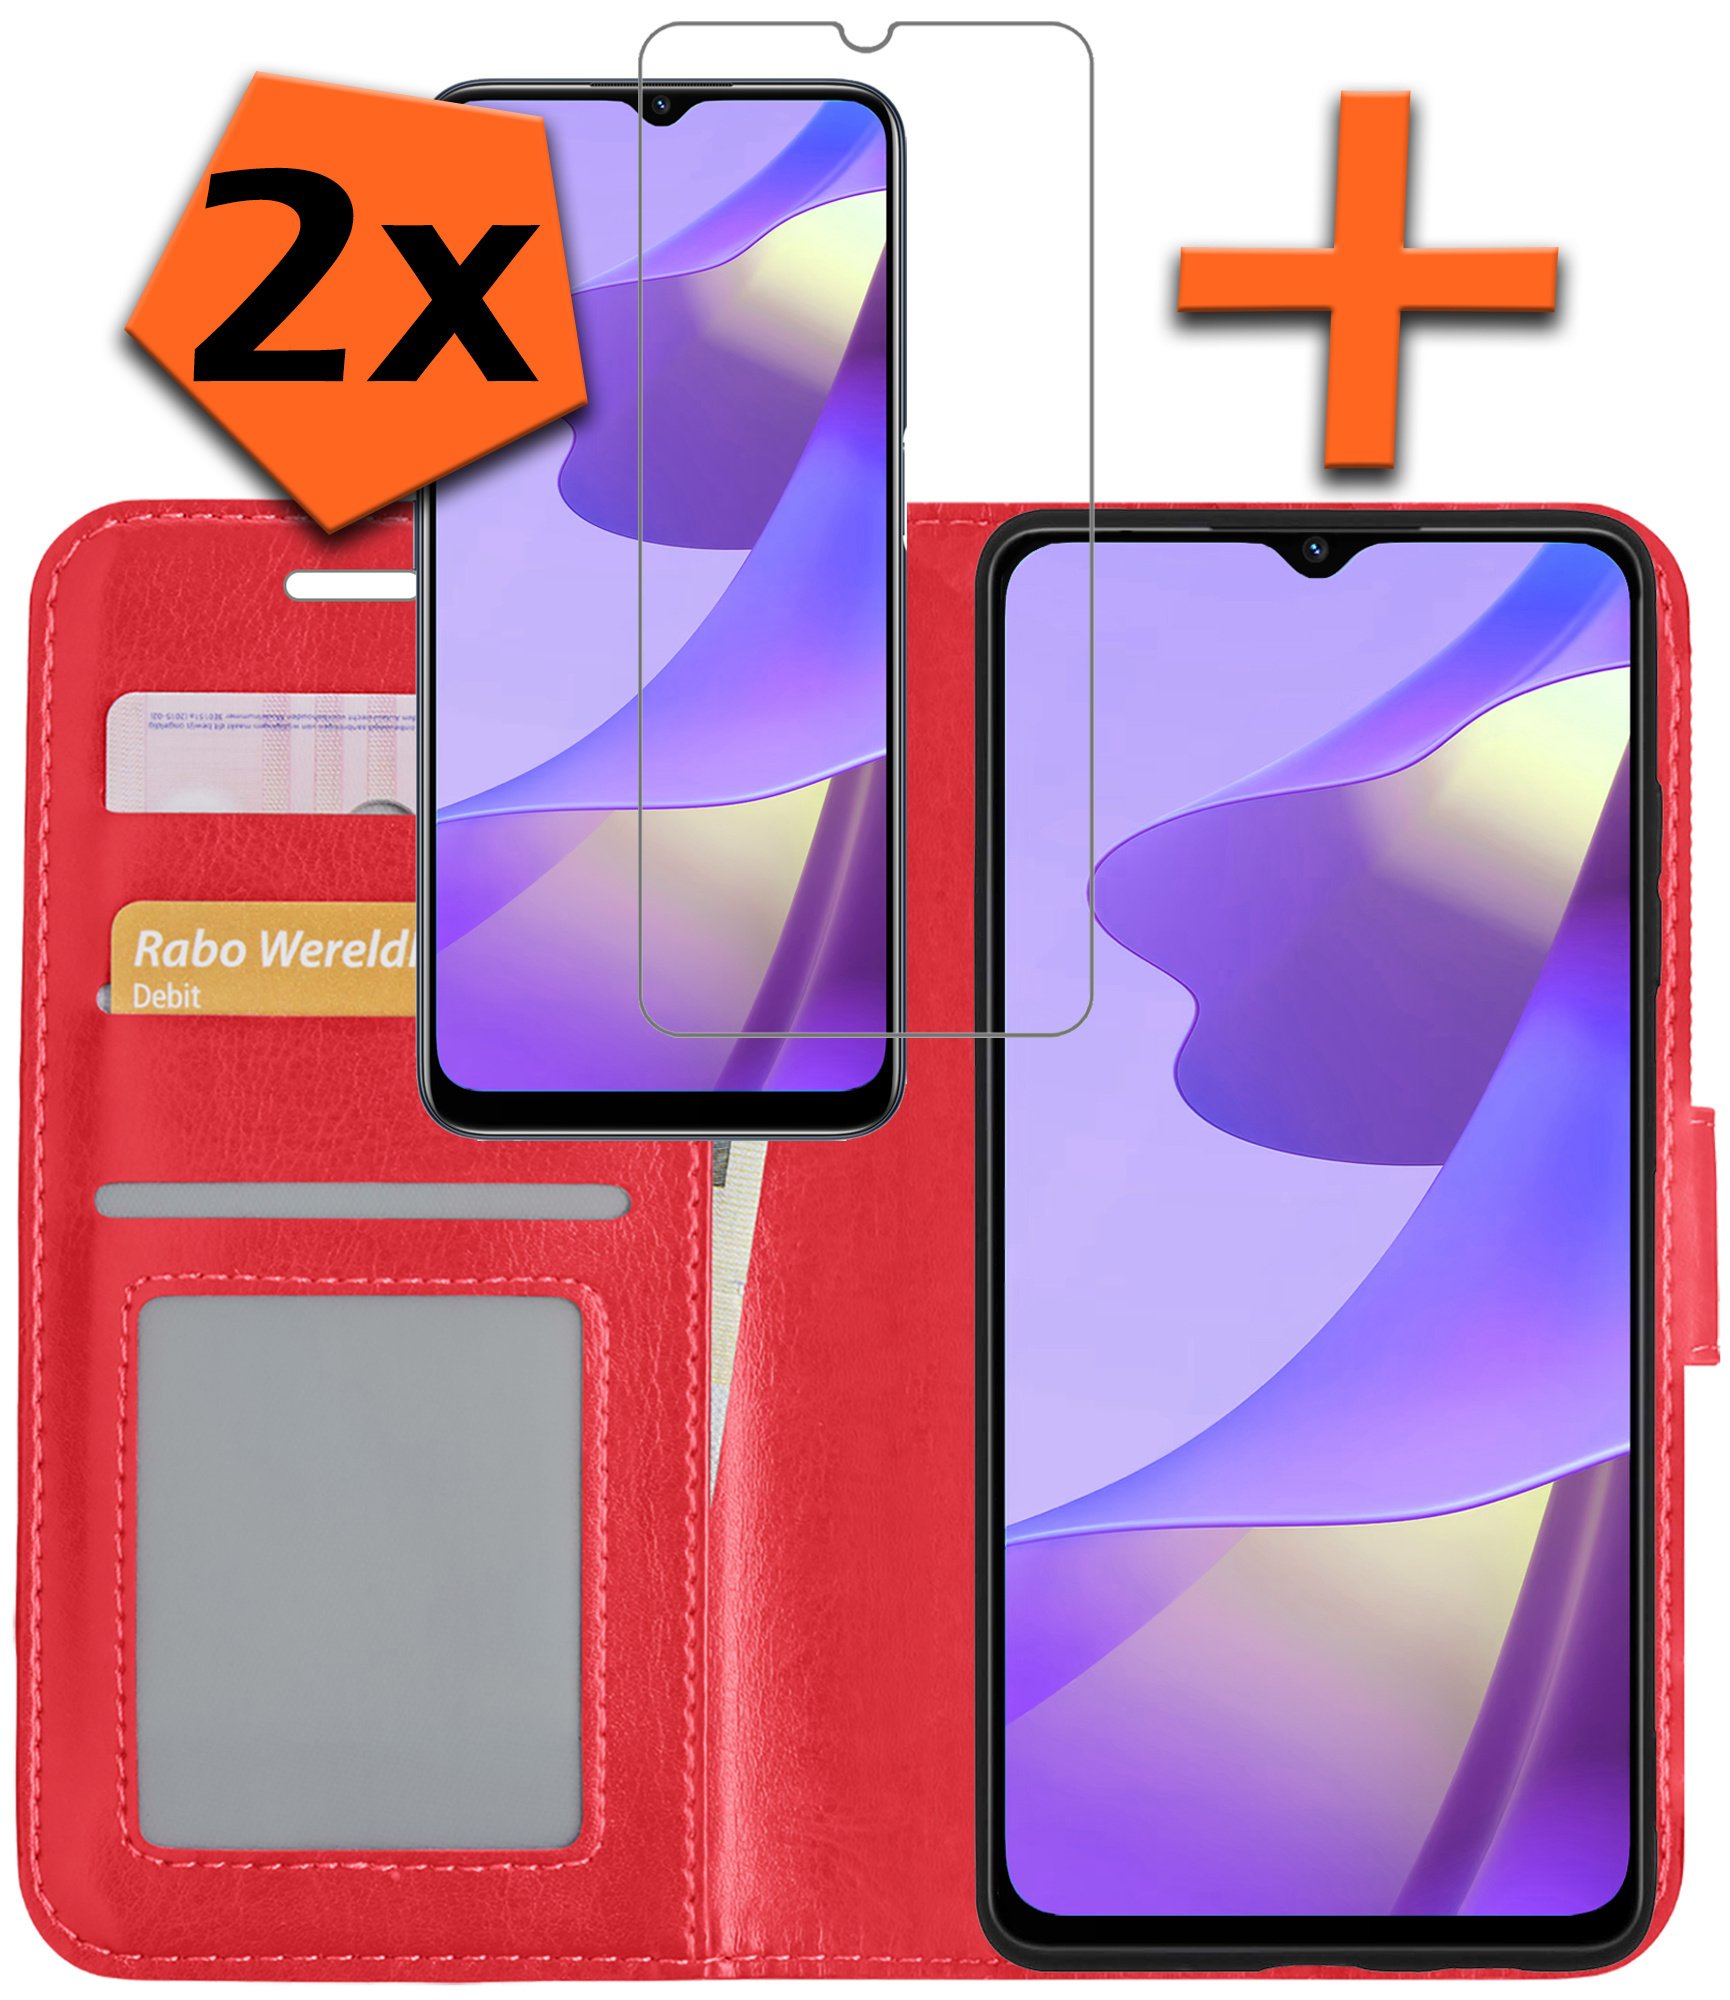 Nomfy OPPO A16s Hoesje Bookcase Met 2x Screenprotector - OPPO A16s Screenprotector 2x - OPPO A16s Book Case Met 2x Screenprotector Rood